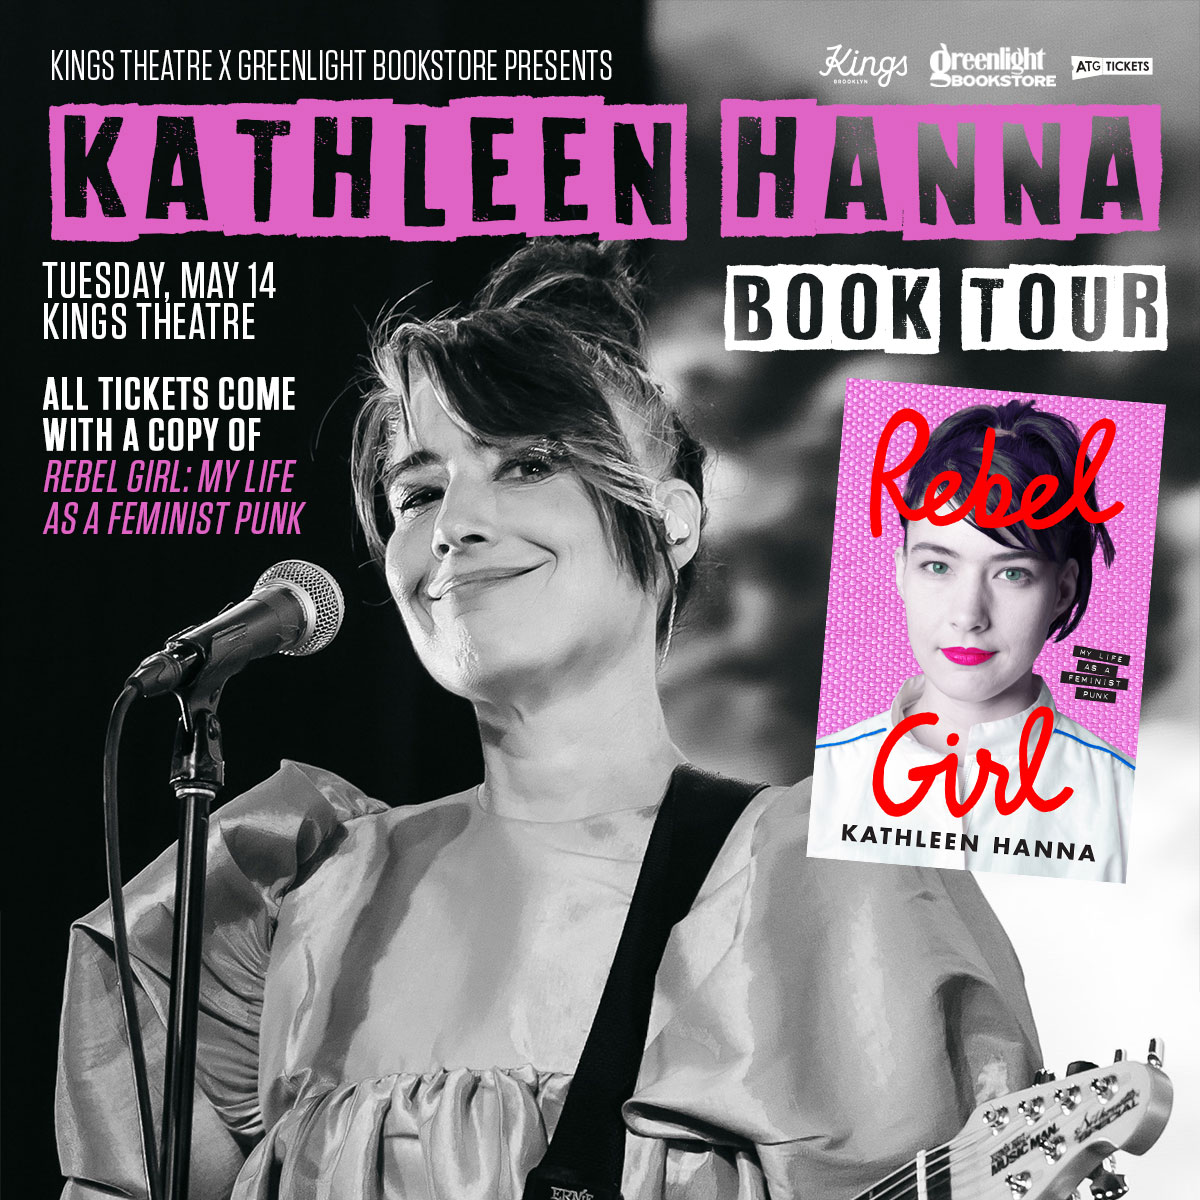 Approved creative for the Kathleen Hanna Book Tour campaign at Kings Theatre (2023).